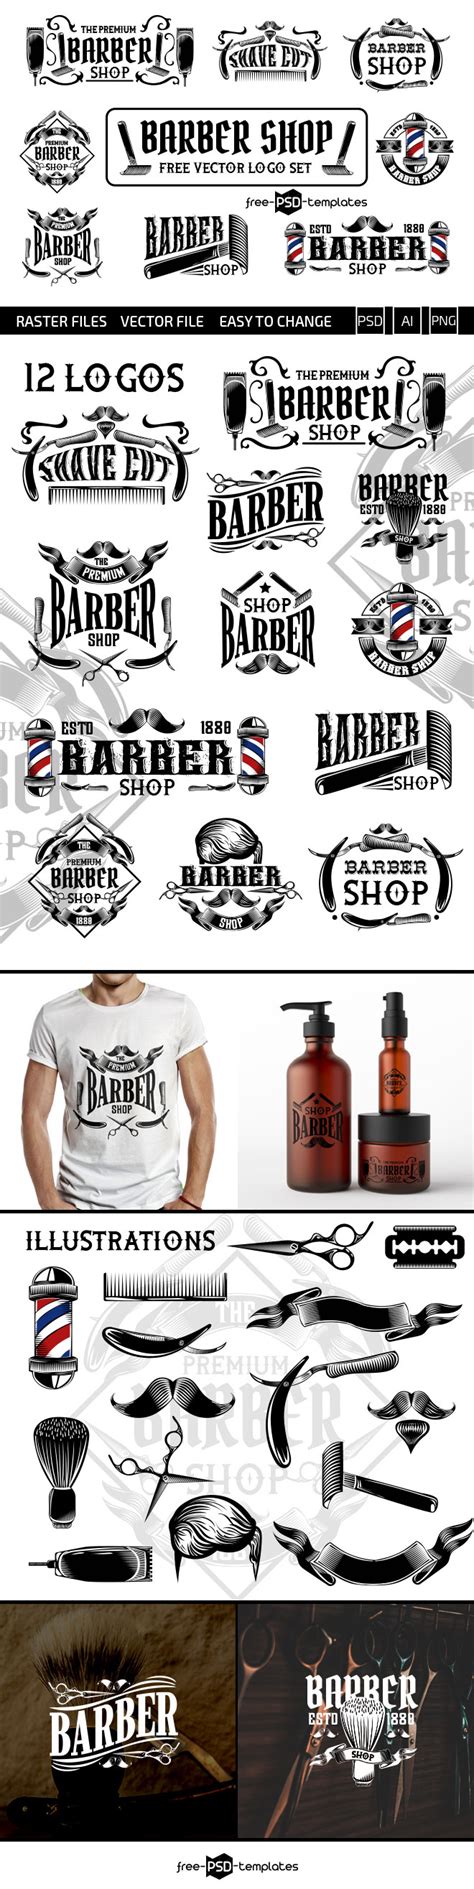 Such impressive logos can even convert them into your loyal customers. Free Barber Shop Vector Logo Set | Free PSD Templates